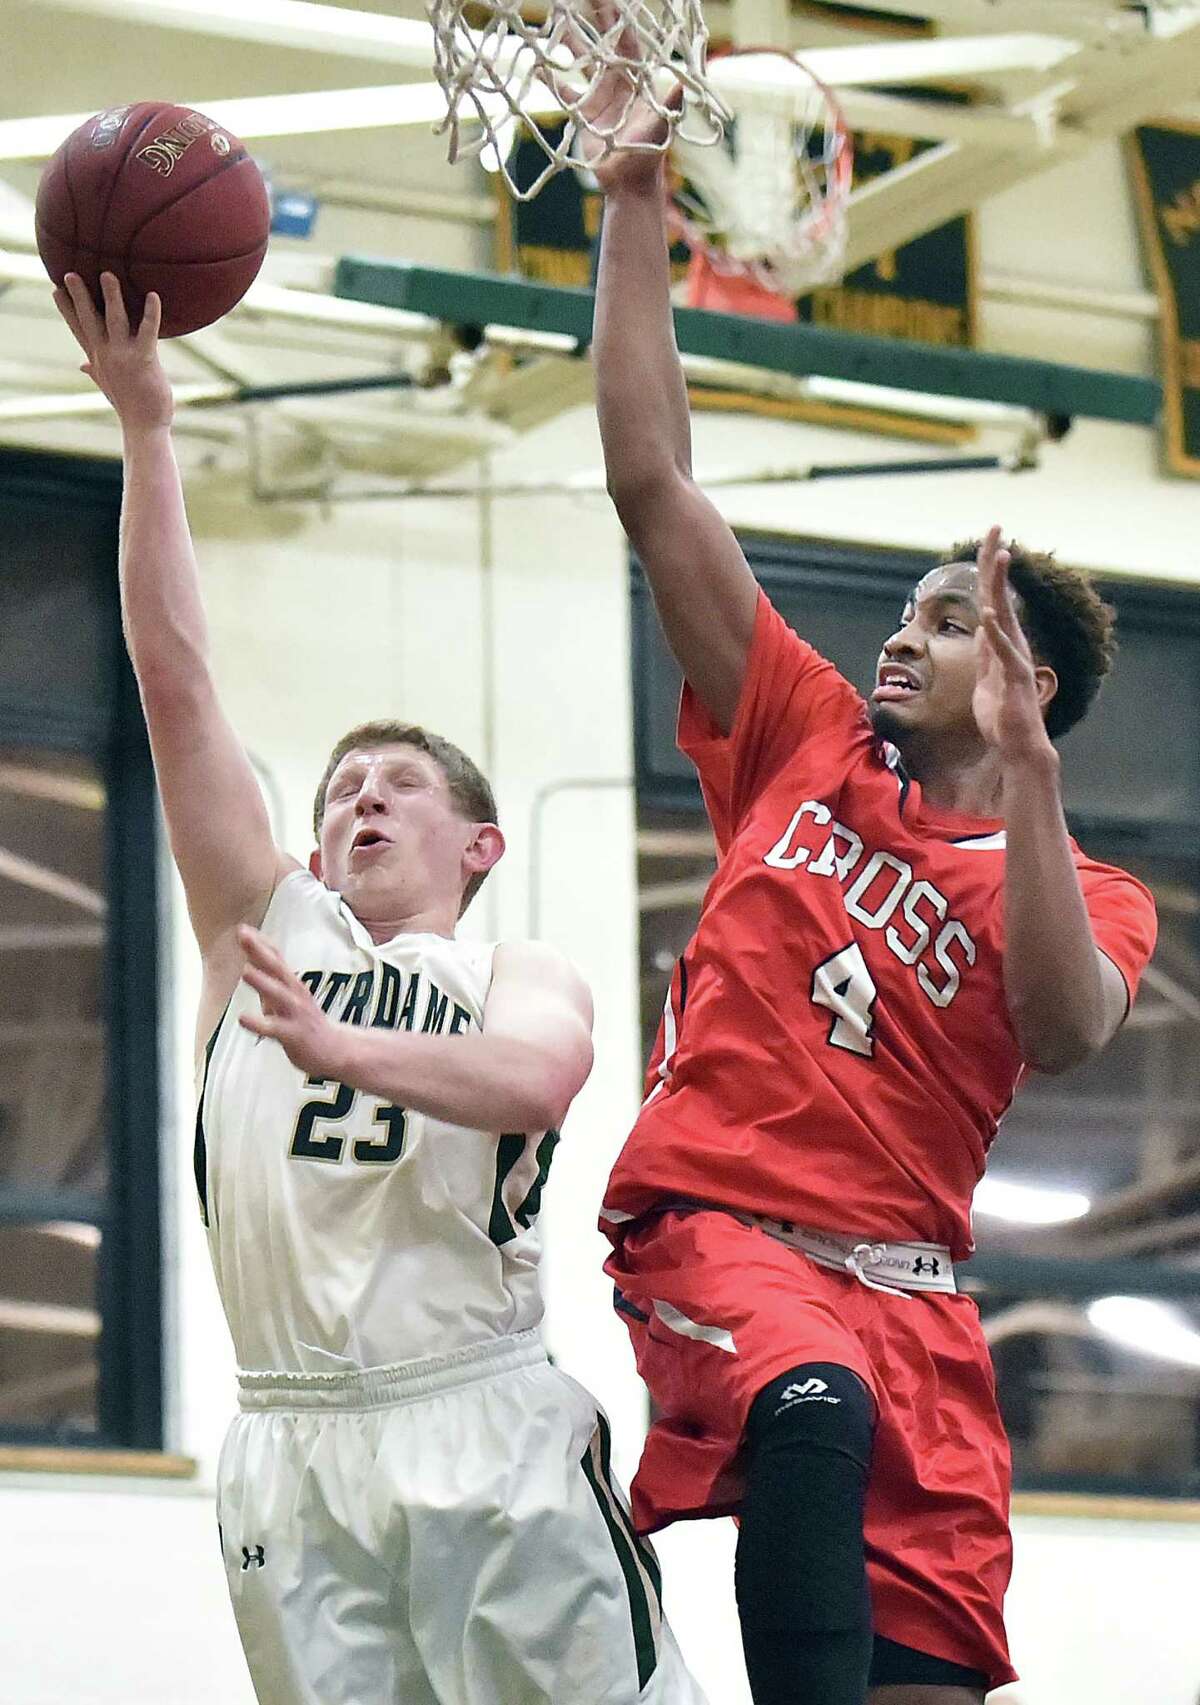 Notre Dame’s Ben Bagnoli goes to the basket as Wilbur Cross’ Jaykeen Foreman defends in the SCC tournament opening round Thursday.